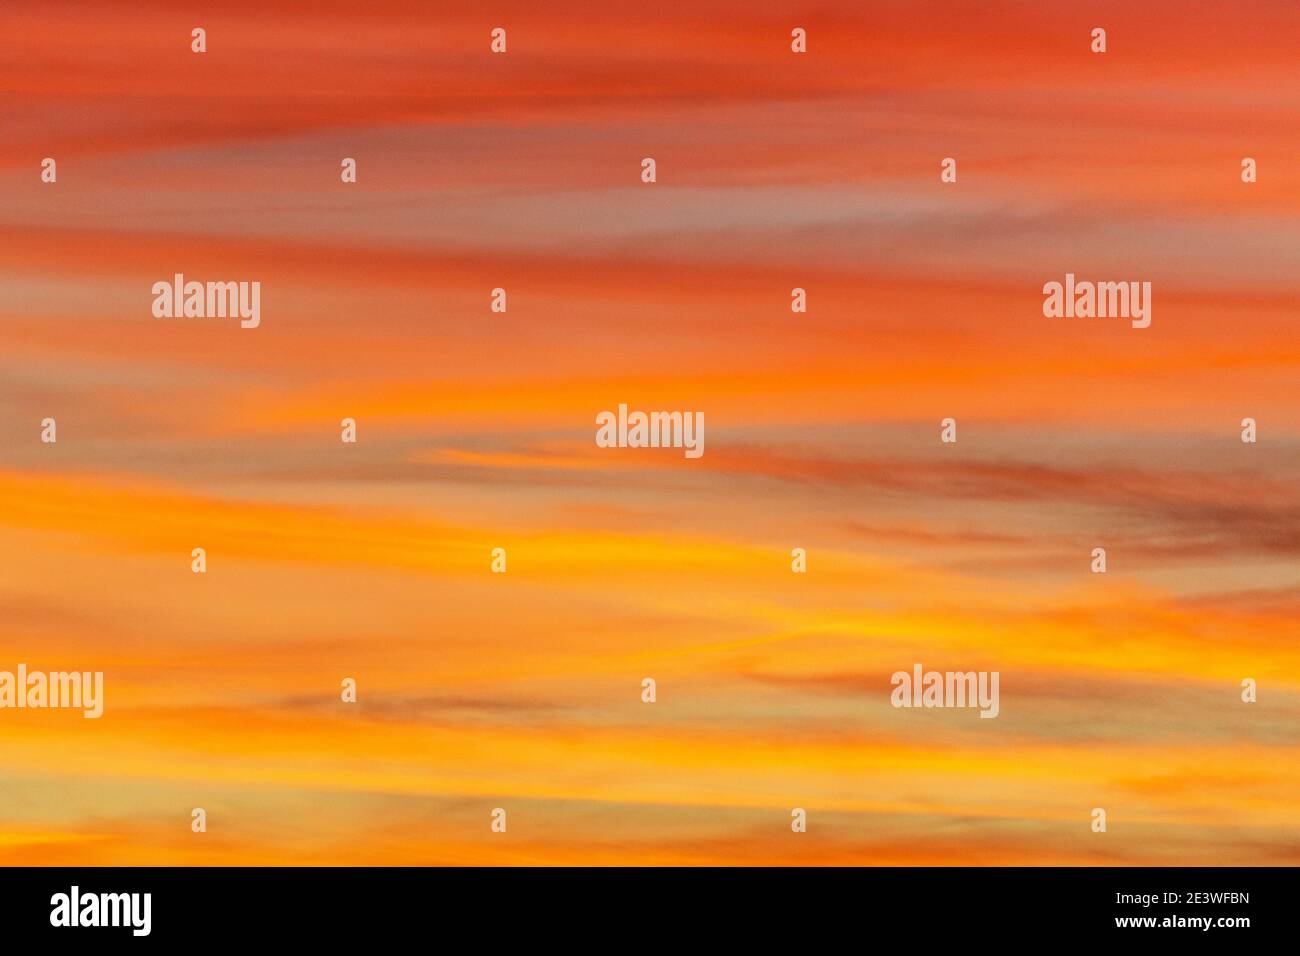 Dusk's setting sun creates clouds with stripes colored hot pink and orange sherbet. Stock Photo